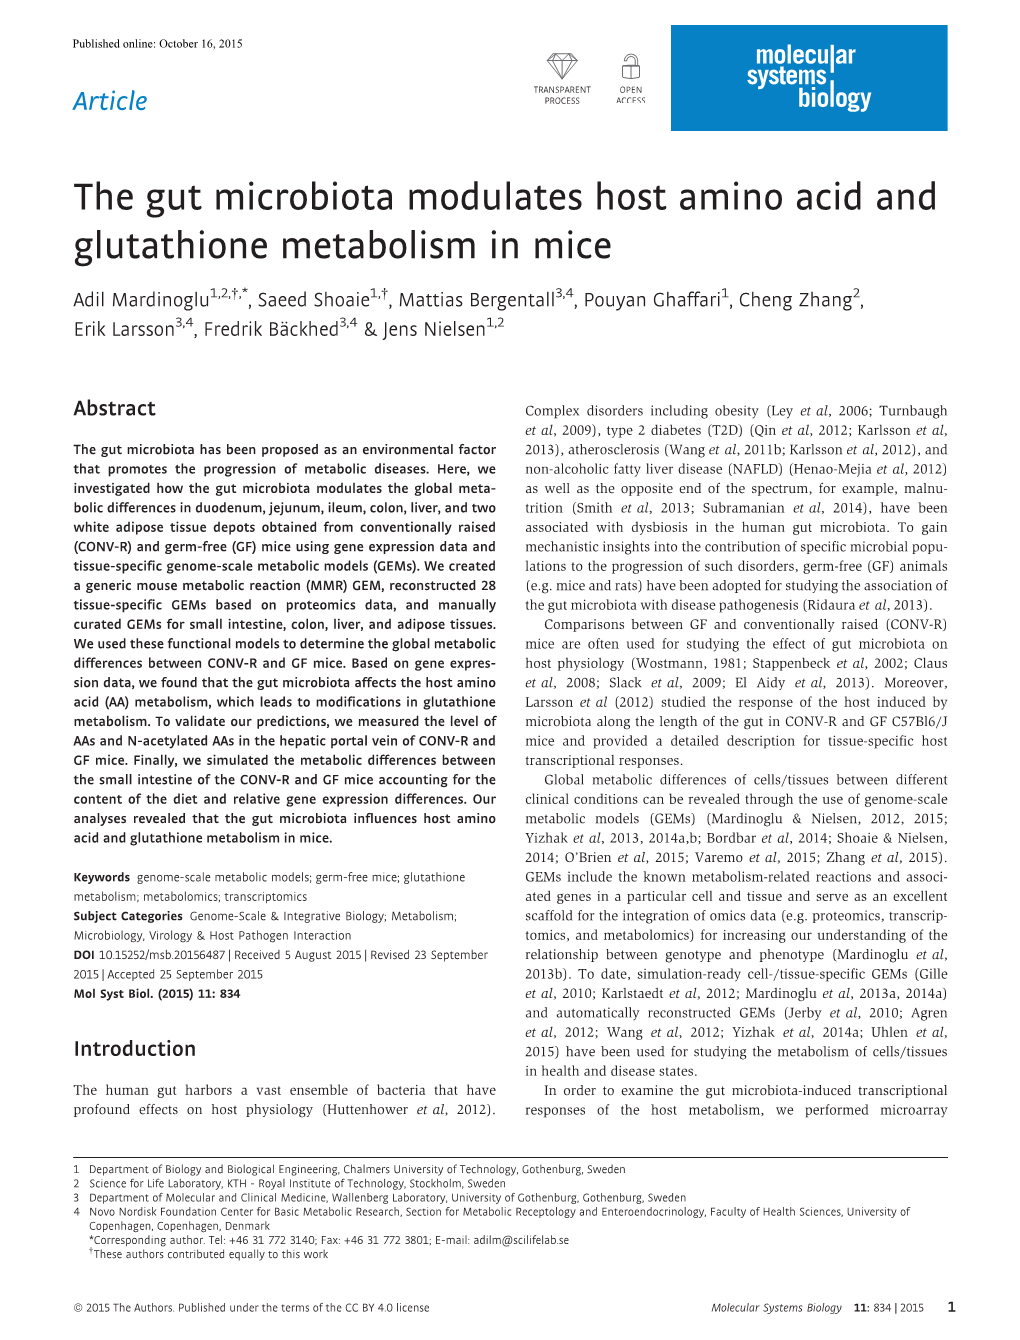 The Gut Microbiota Modulates Host Amino Acid and Glutathione Metabolism in Mice